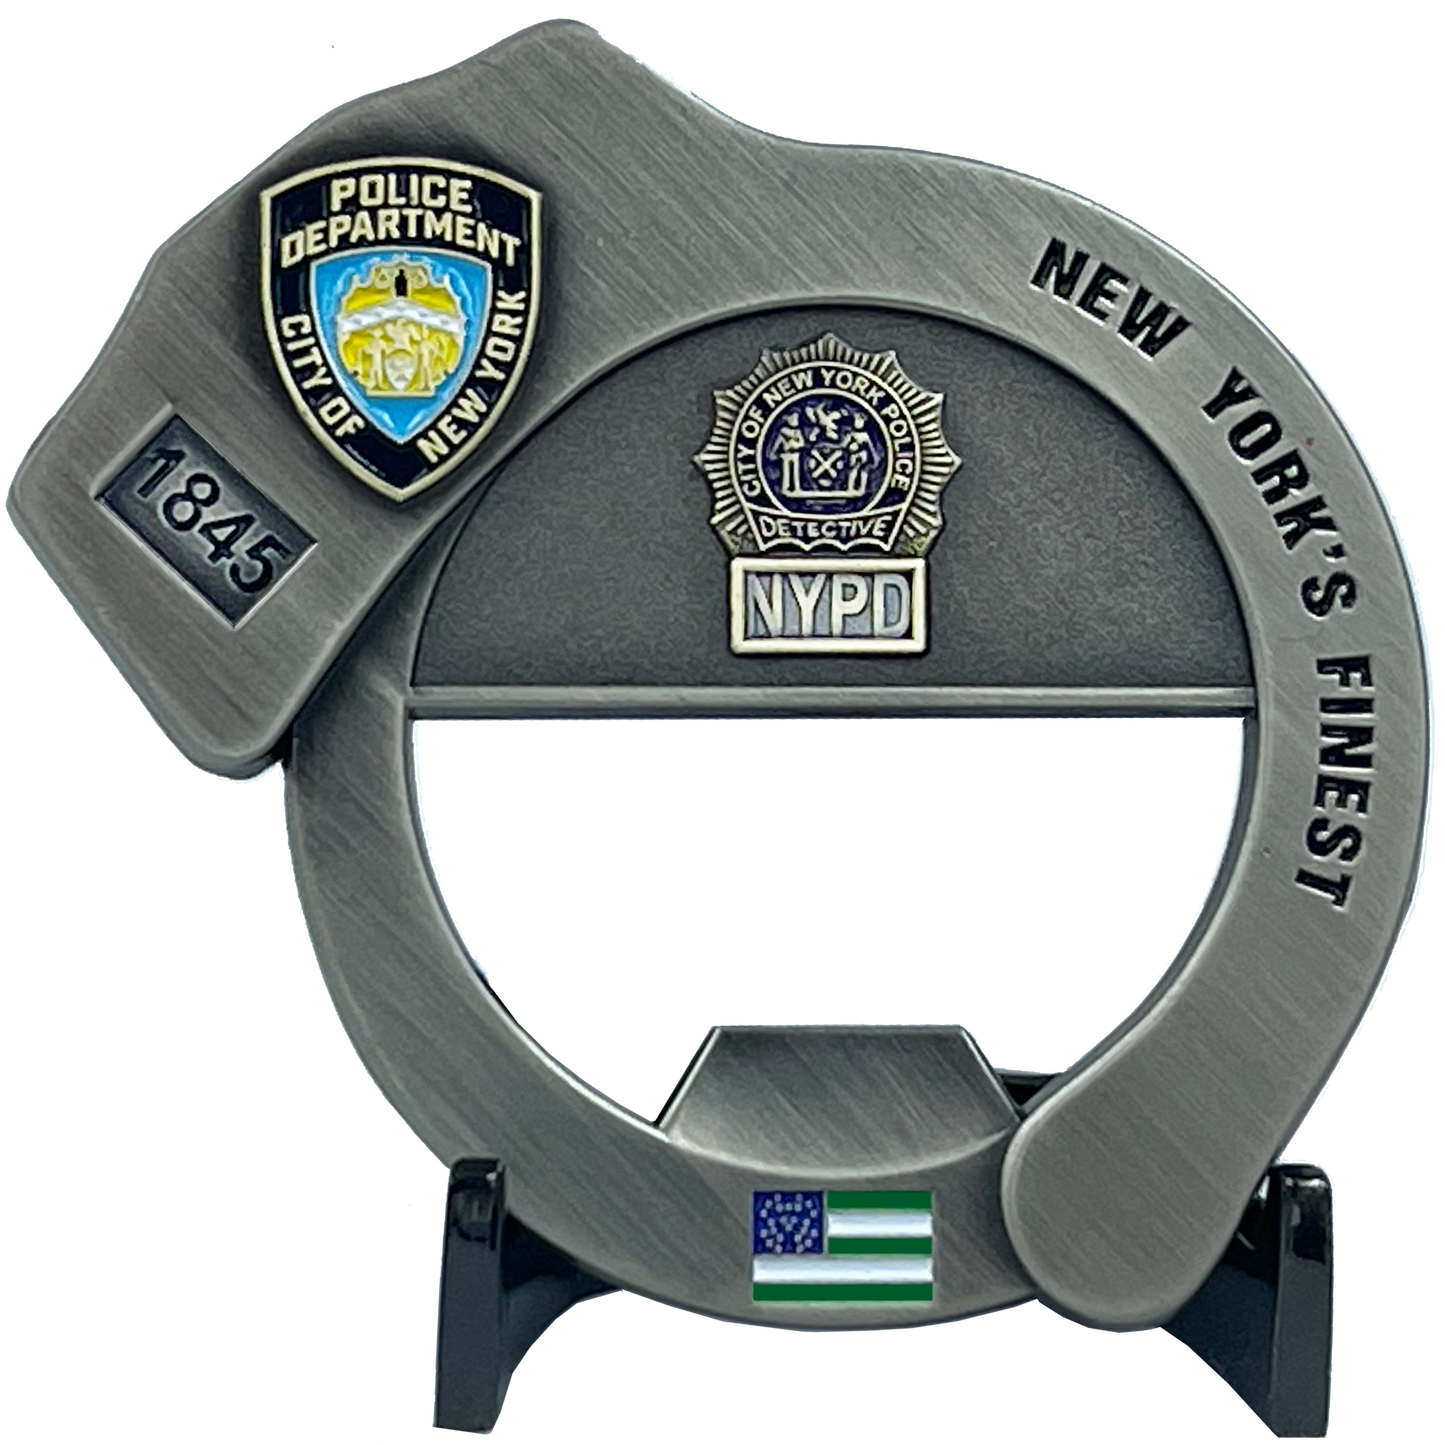 BL9-019 NYPD Officer Sergeant Detective Handcuff Bottle Opener Challenge Coin